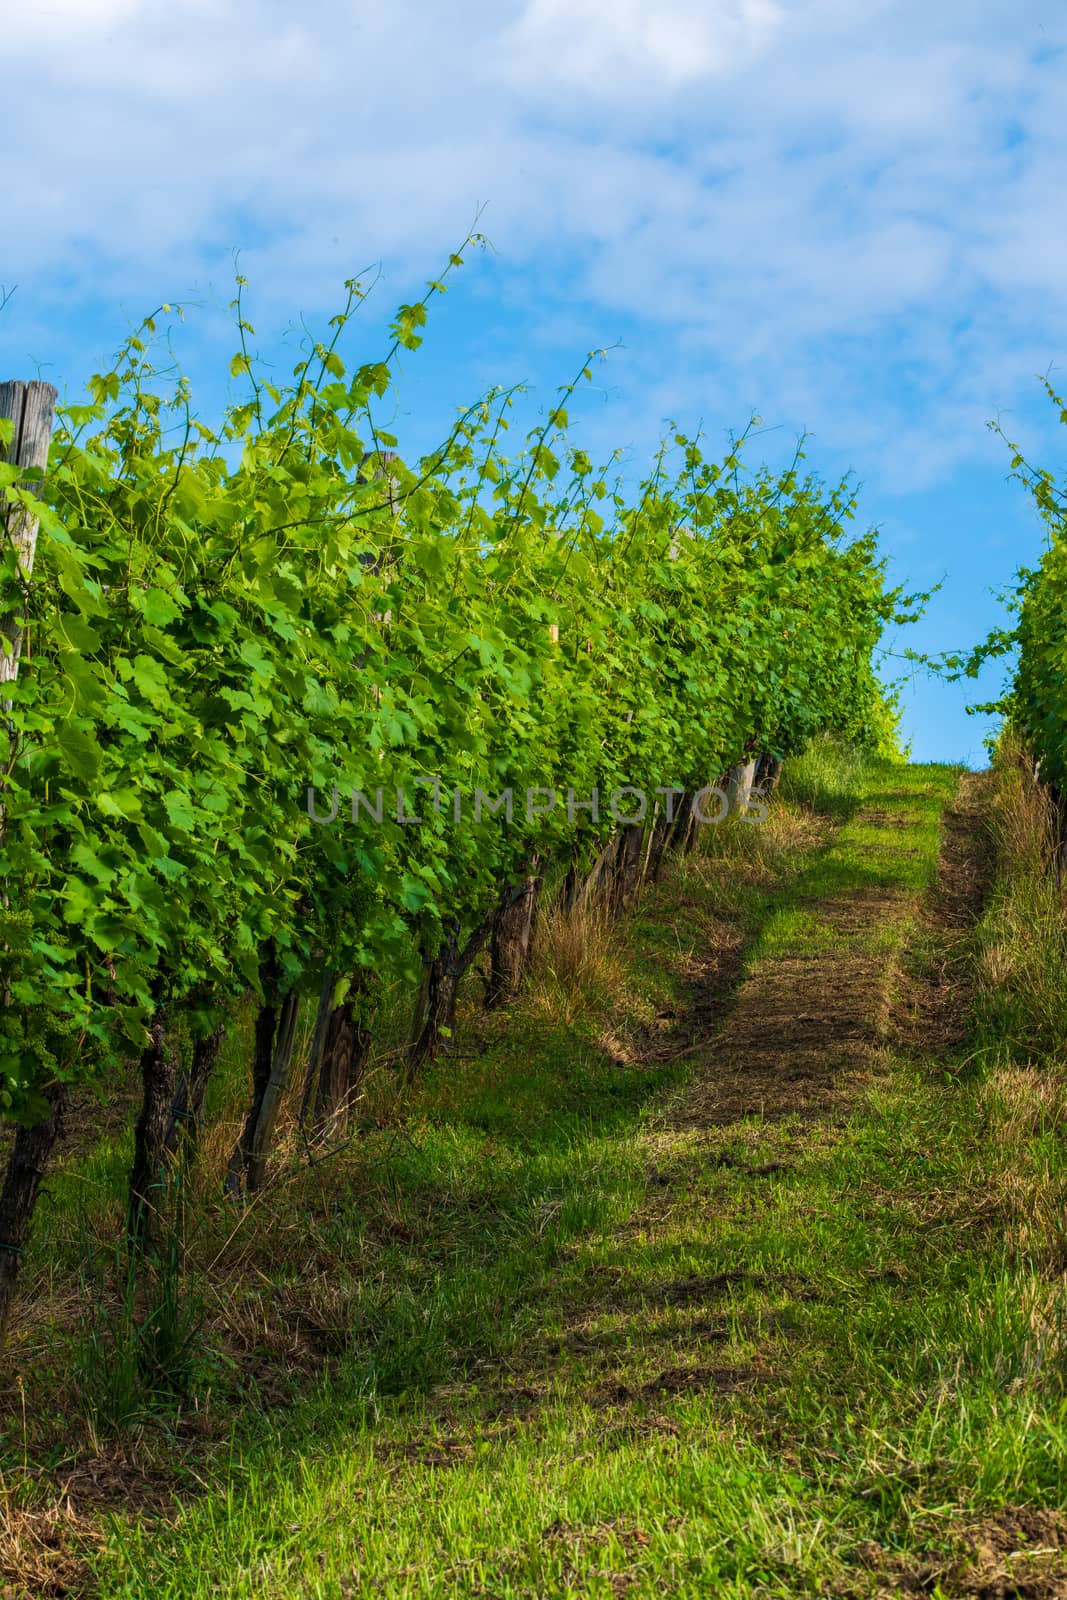 Vineyard in summer morning, grape vines planted in rows, Europe by asafaric